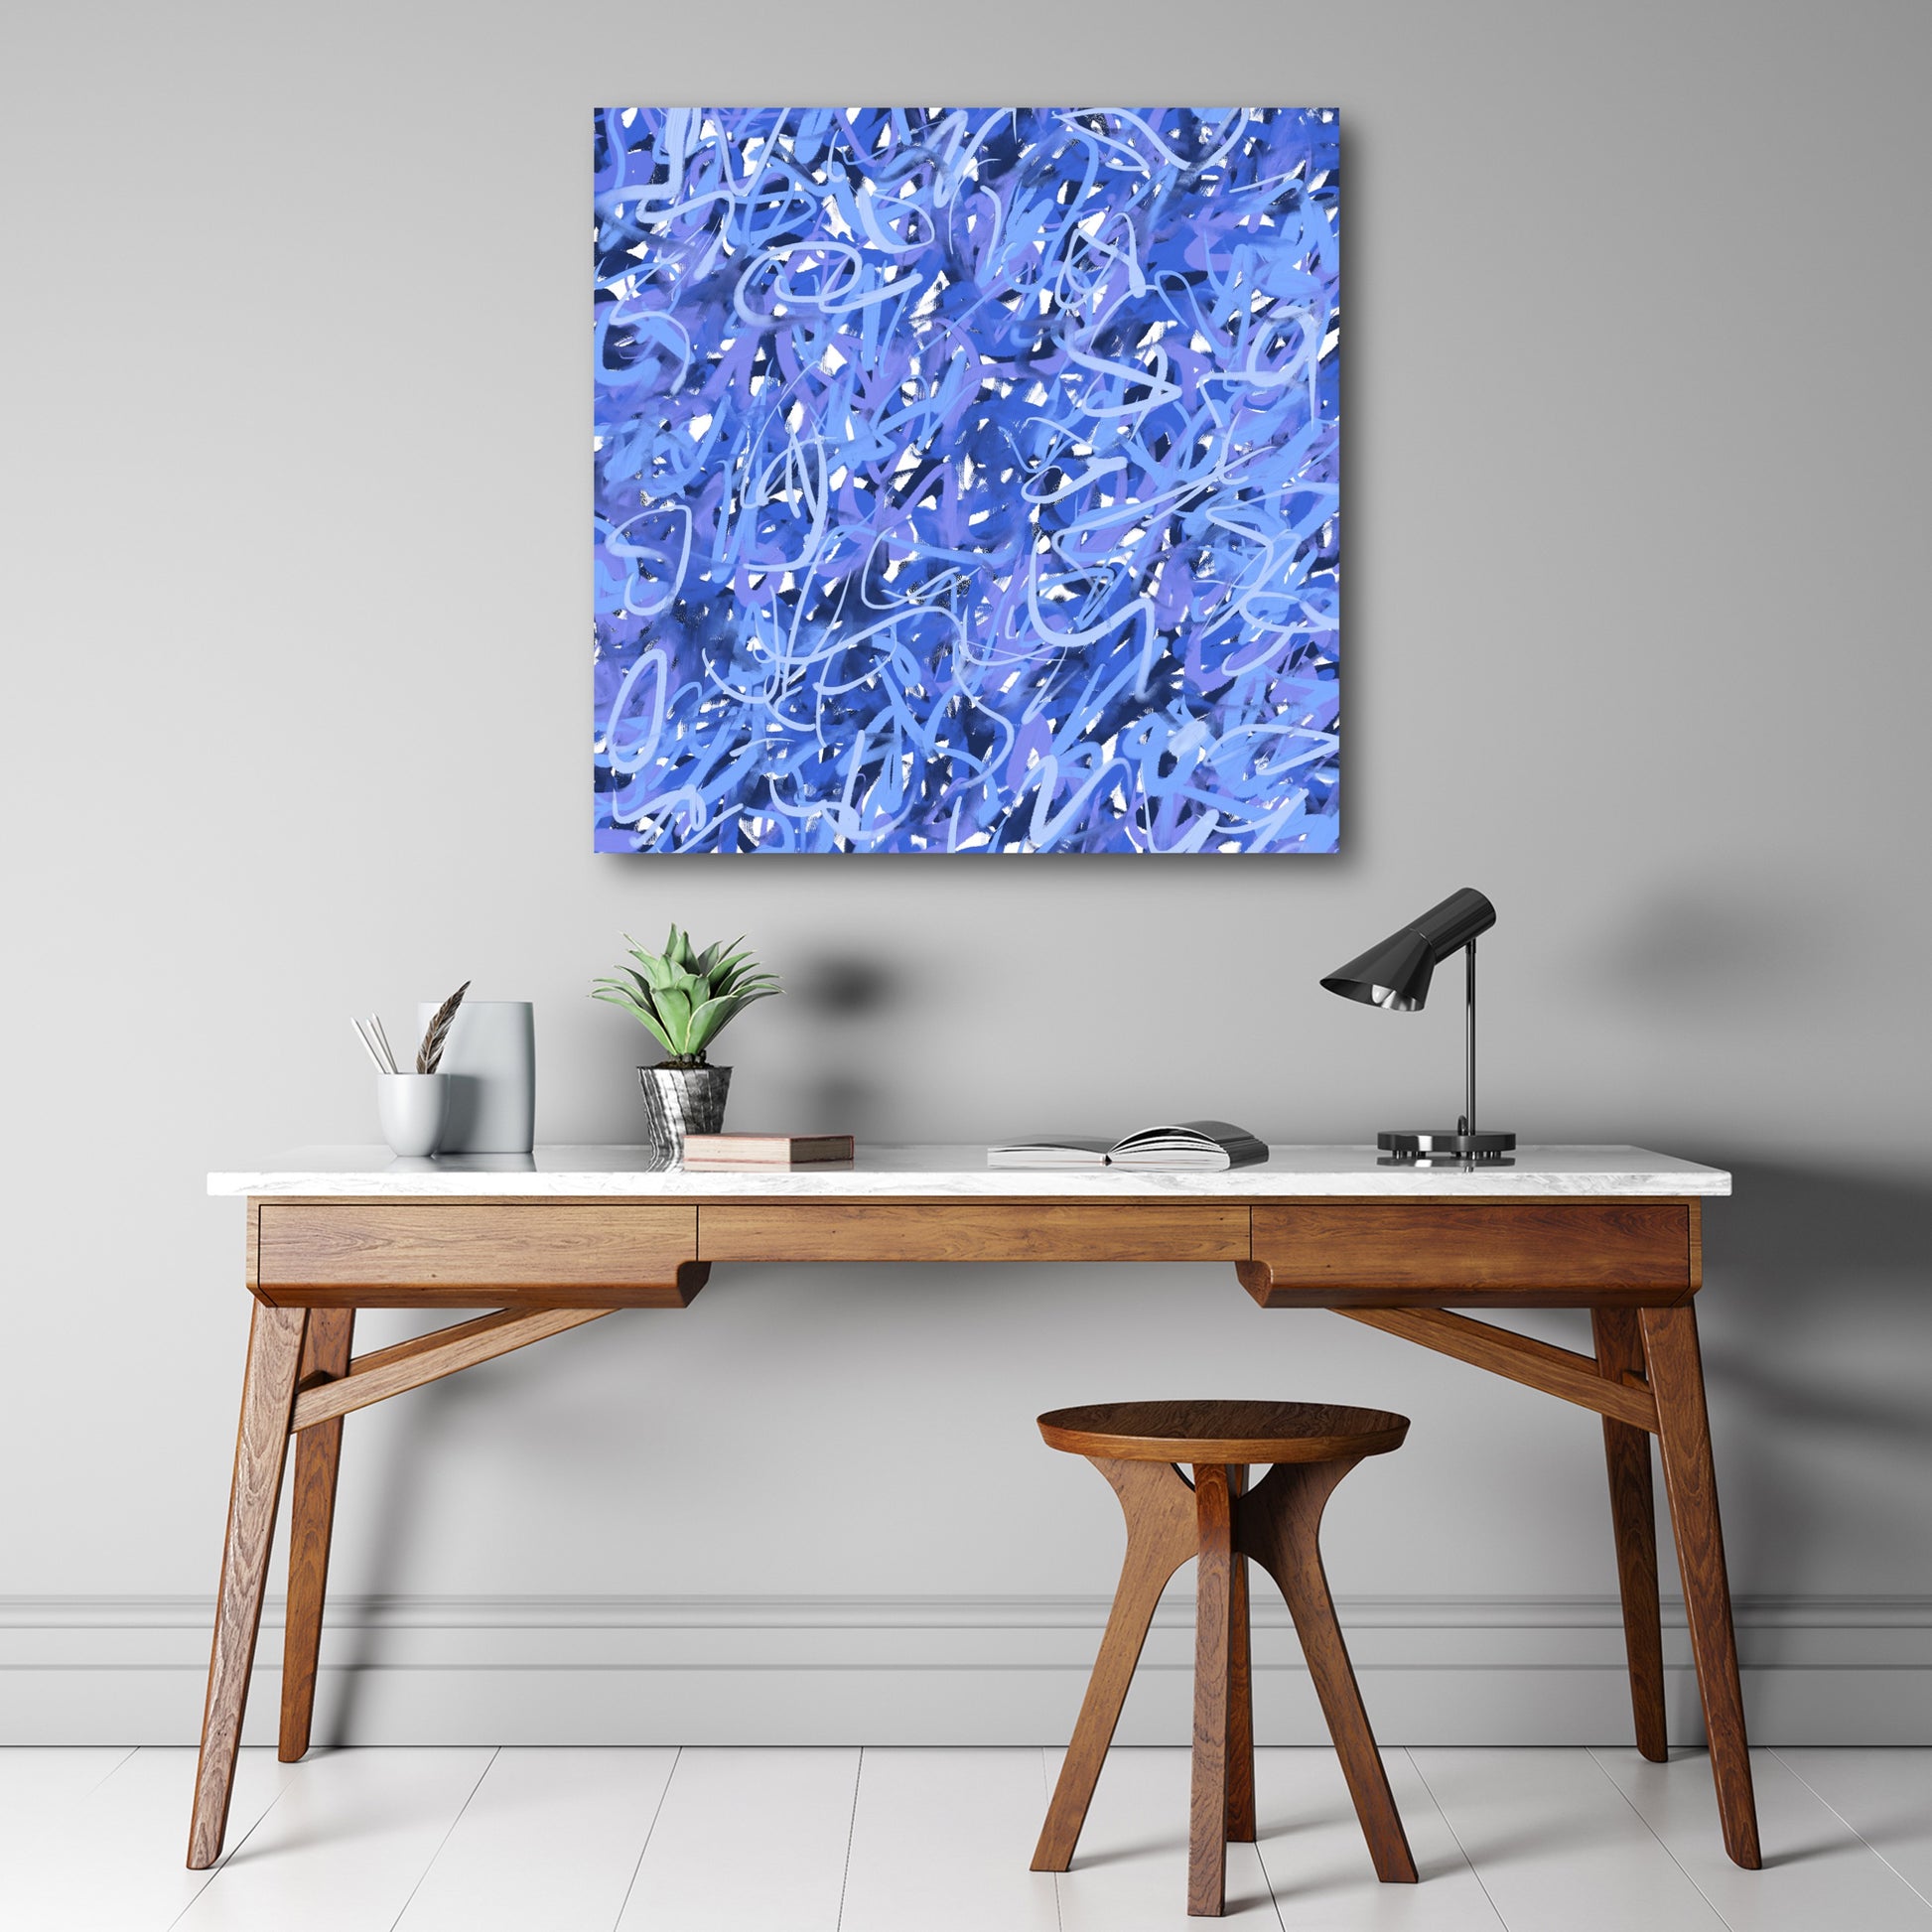 'A Touch Of Frost' hanging above a modern wooden desk with matching wooden stool. 